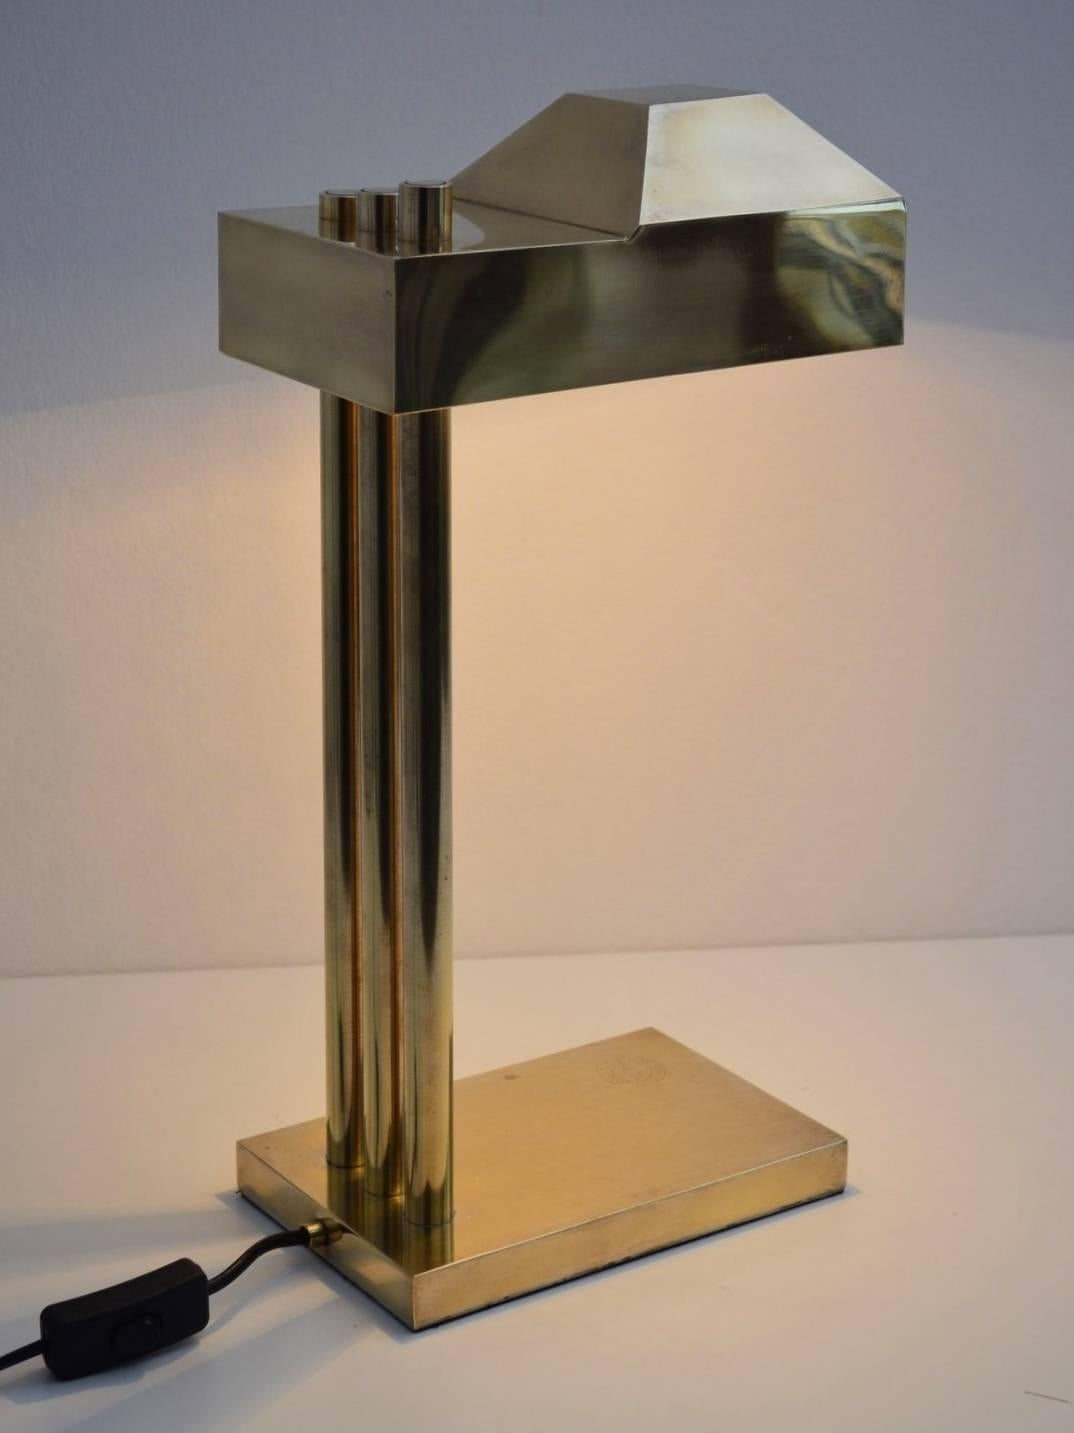 Beautiful shiny brass desk or table lamp designed by Marcel Breuer and manufactured before 1925 to be exposed during the exhibition in Paris 1925. The marking stamp confirms place and date. (see picture)
A real treasure with stunning modern design